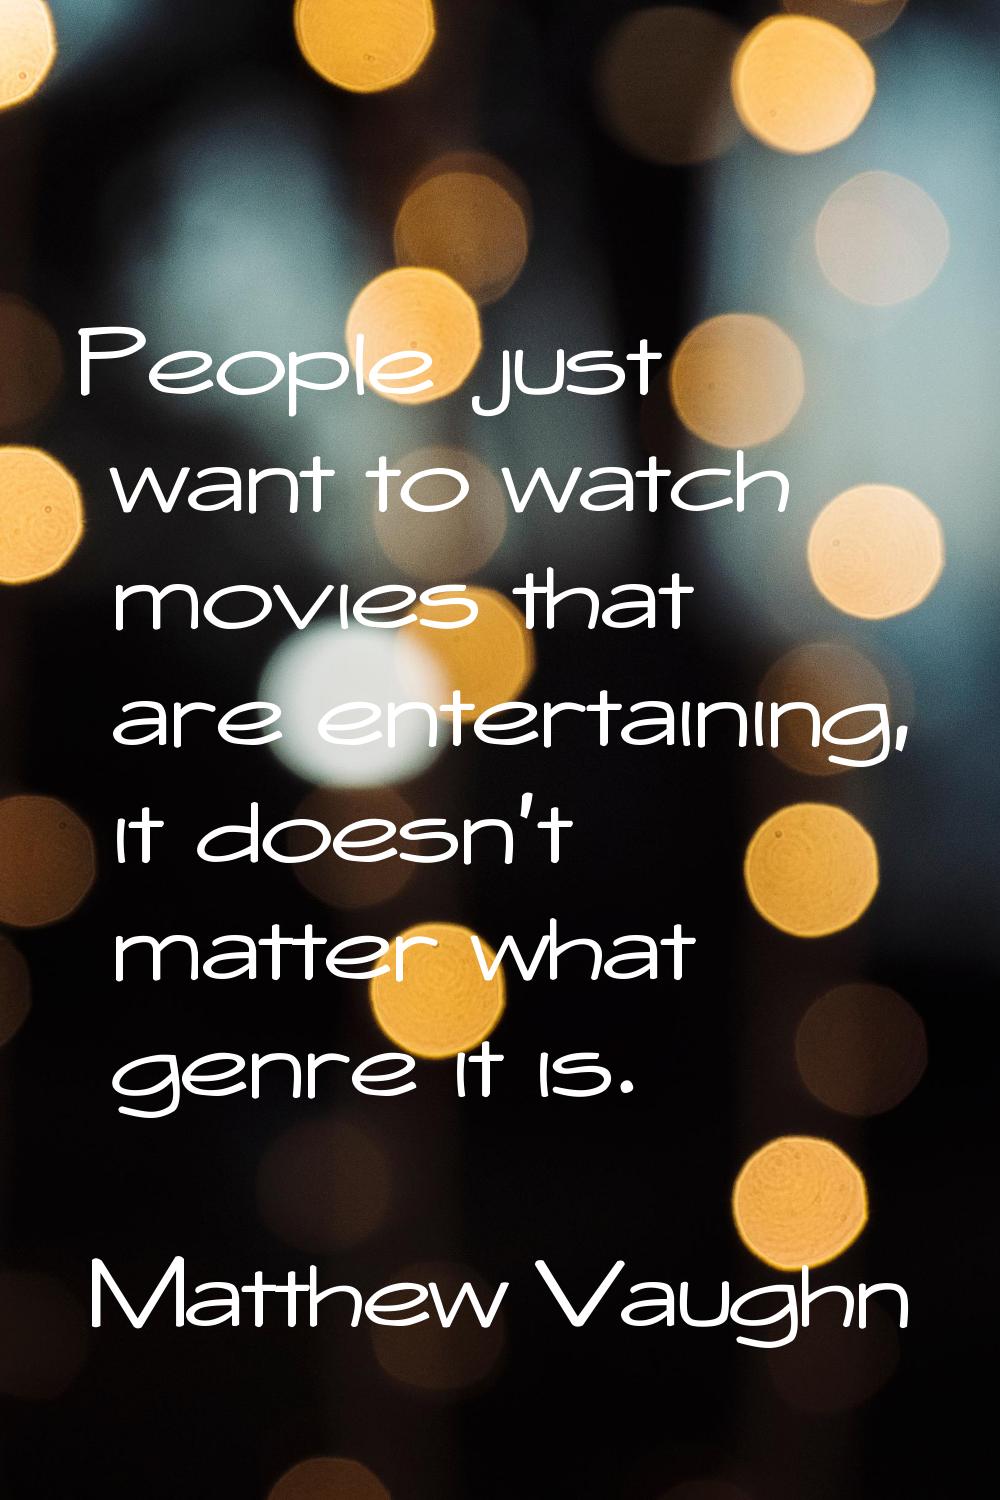 People just want to watch movies that are entertaining, it doesn't matter what genre it is.